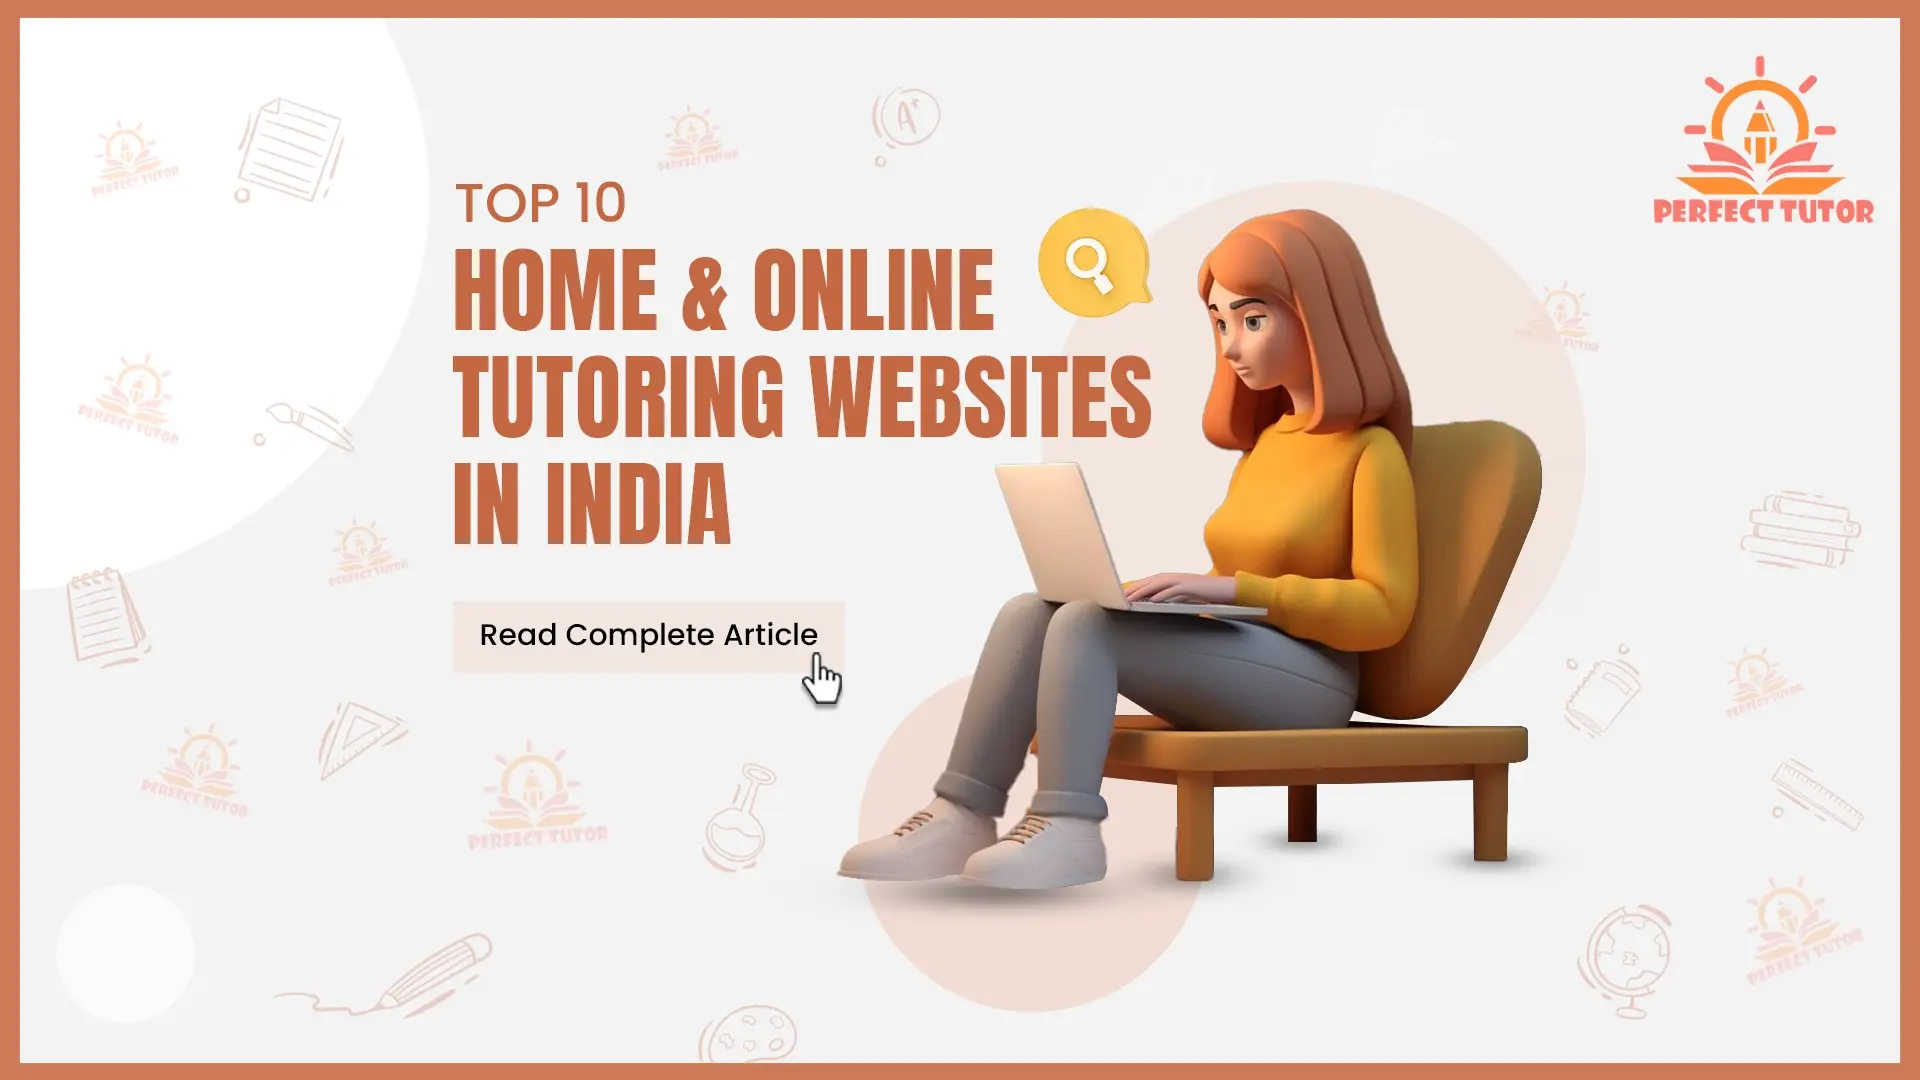  Top 10 Home And Online Tutoring Platforms in India